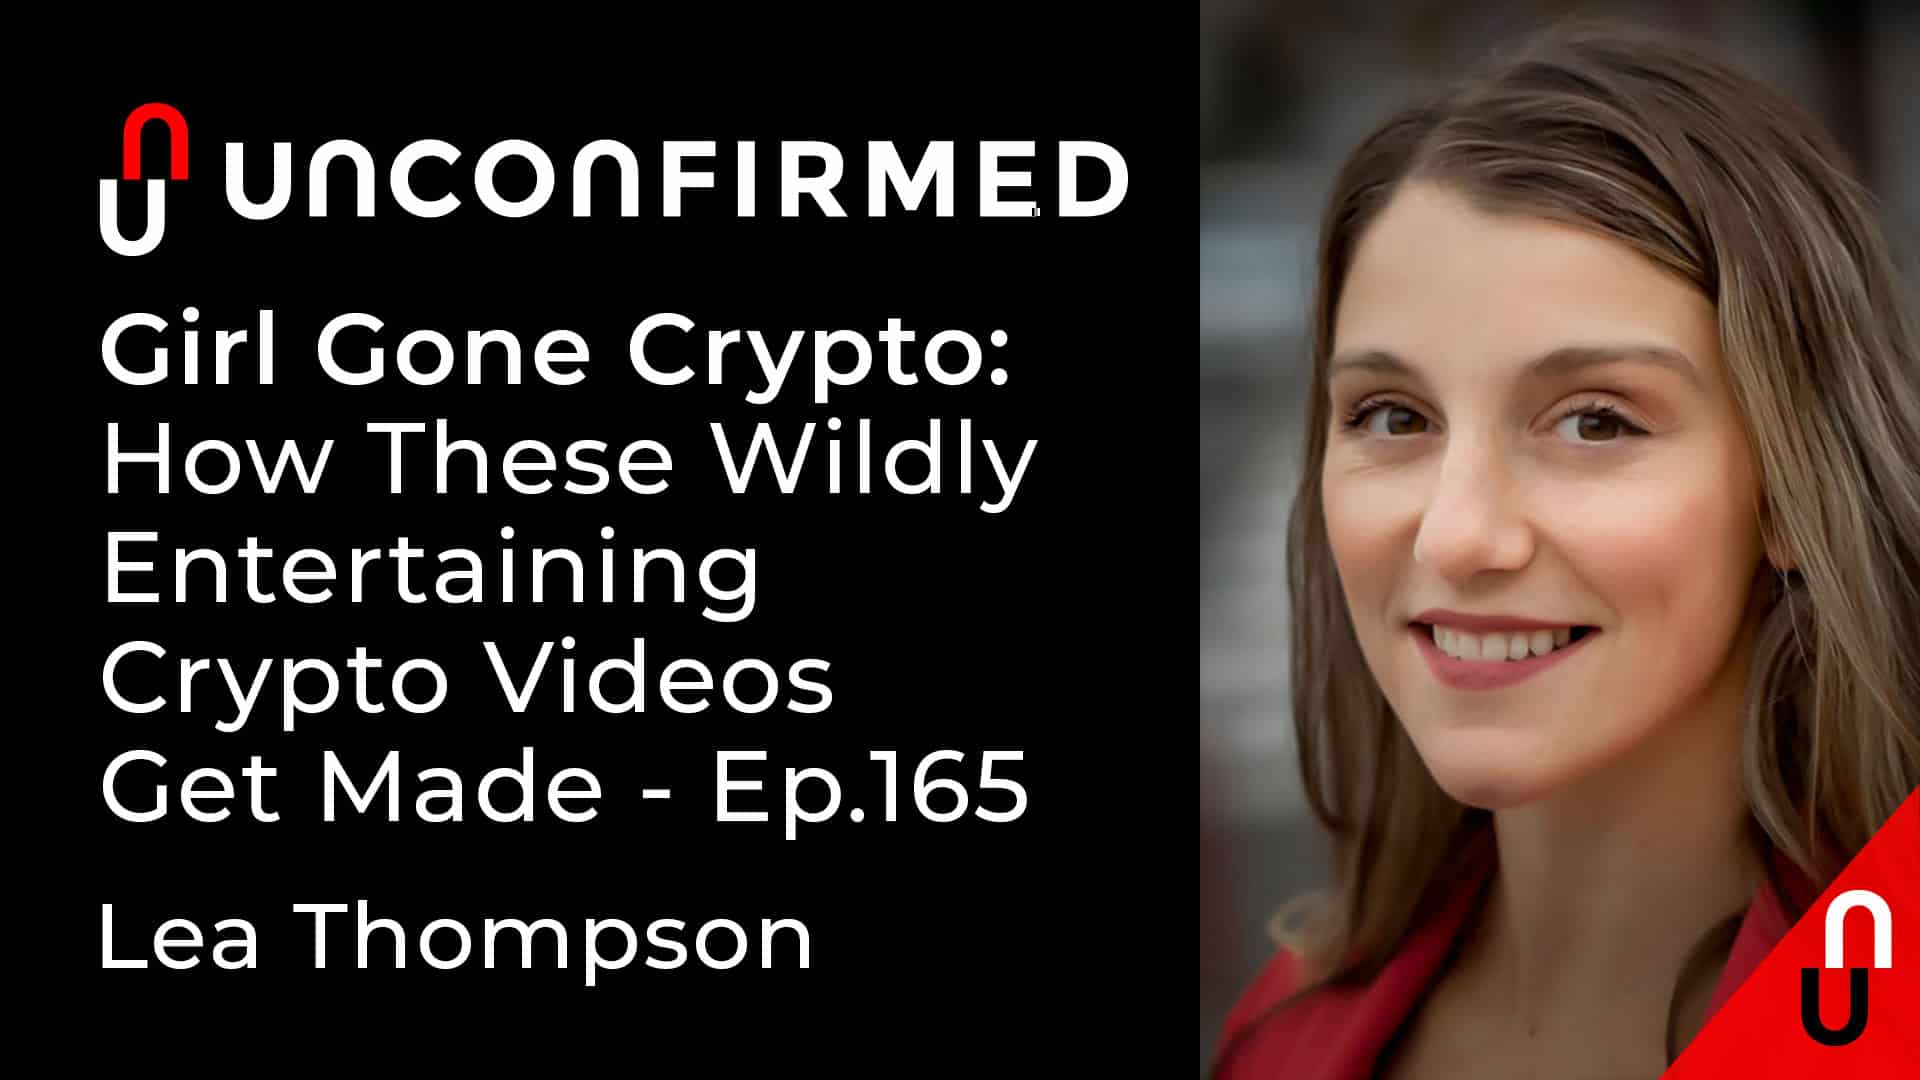 Lea Thompson (Girl Gone Crypto) Review: Statistics, Performance Overview & Supported Projects